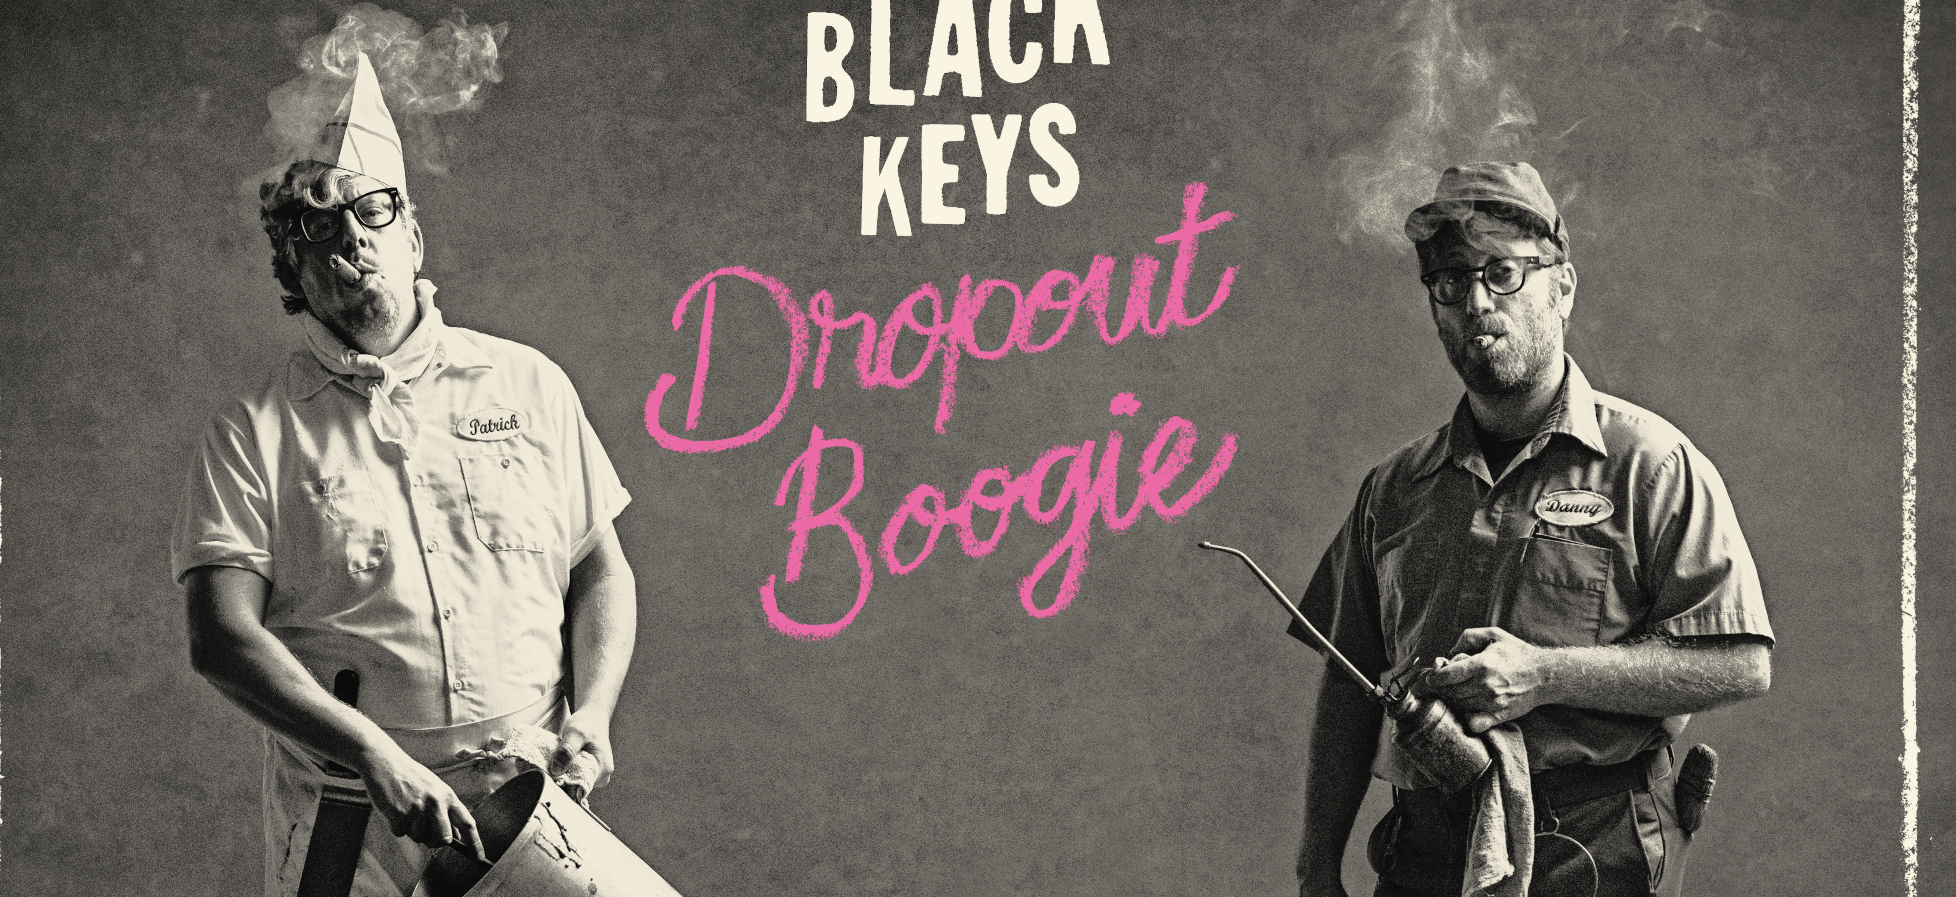 The Black Keys to Release New LP ‘Dropout Boogie,’ Share New Single, “Wild Child”